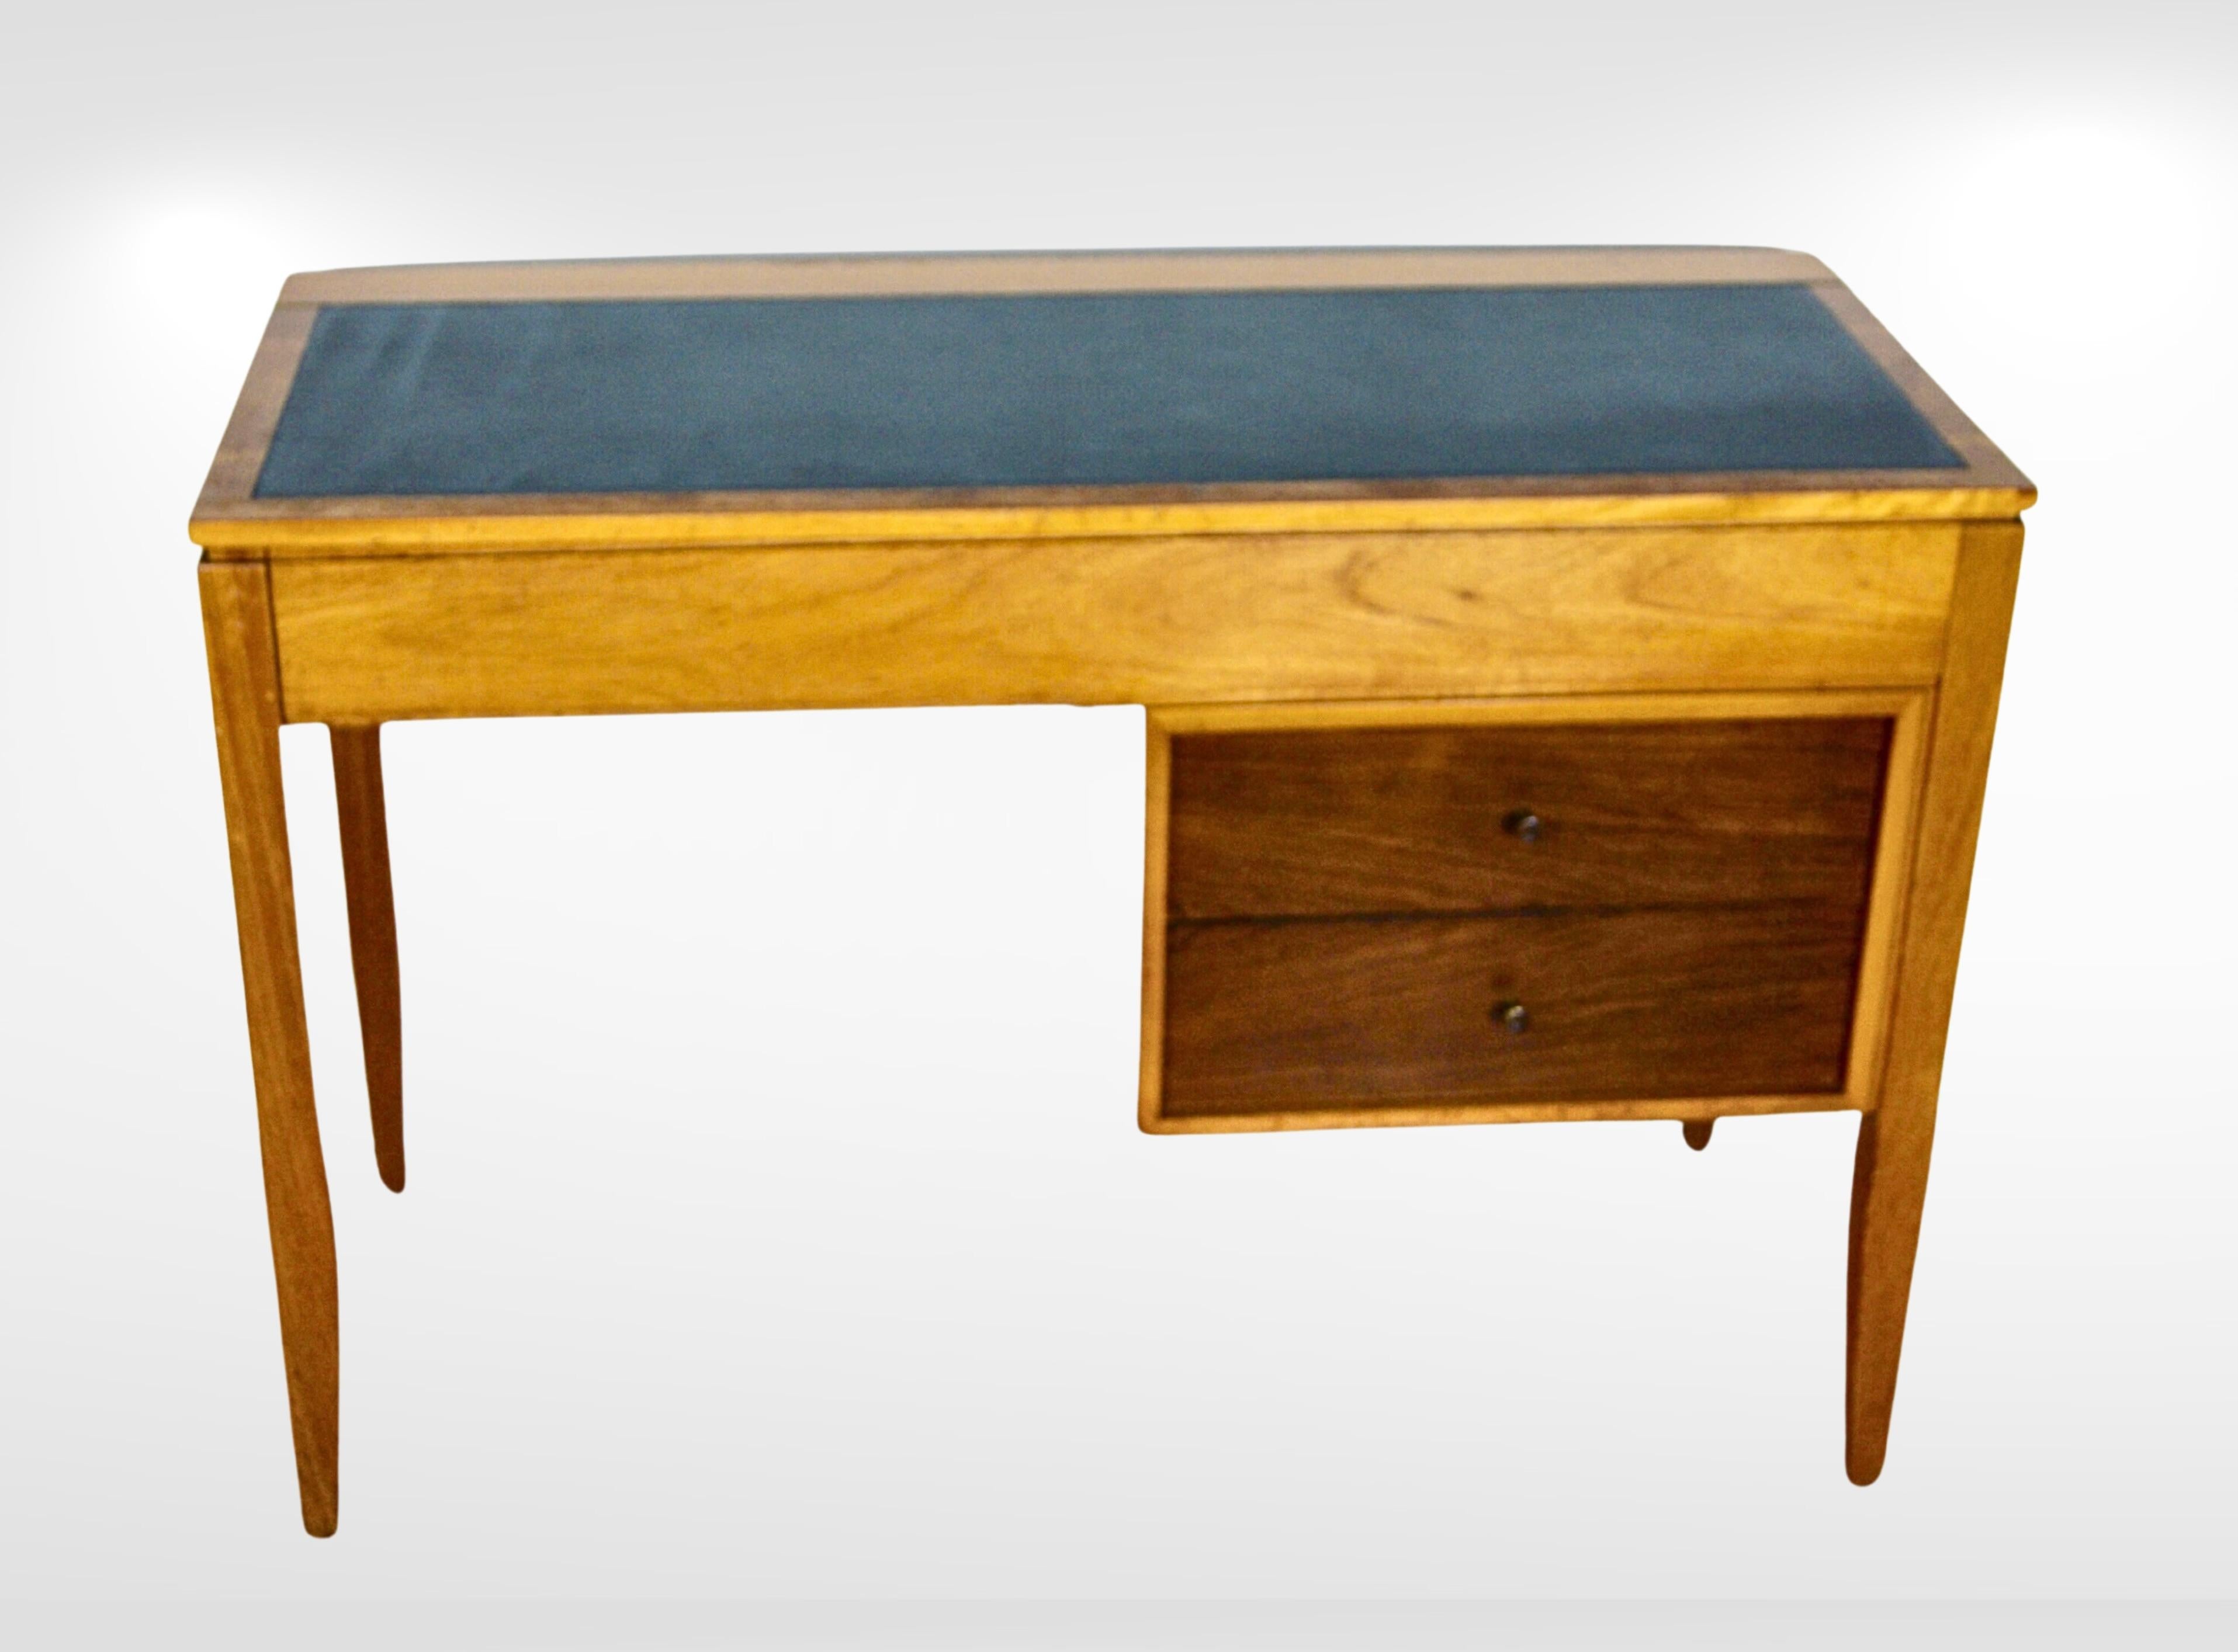 Mid-century two tone walnut and leather flip top desk/dresser.
Designed by Peter Hayward as part of the M' range for UNIFLEX Furniture GB, circa 1950.
This UNIFLEX wood and leather desk is representative of the design trends in compact and multi use